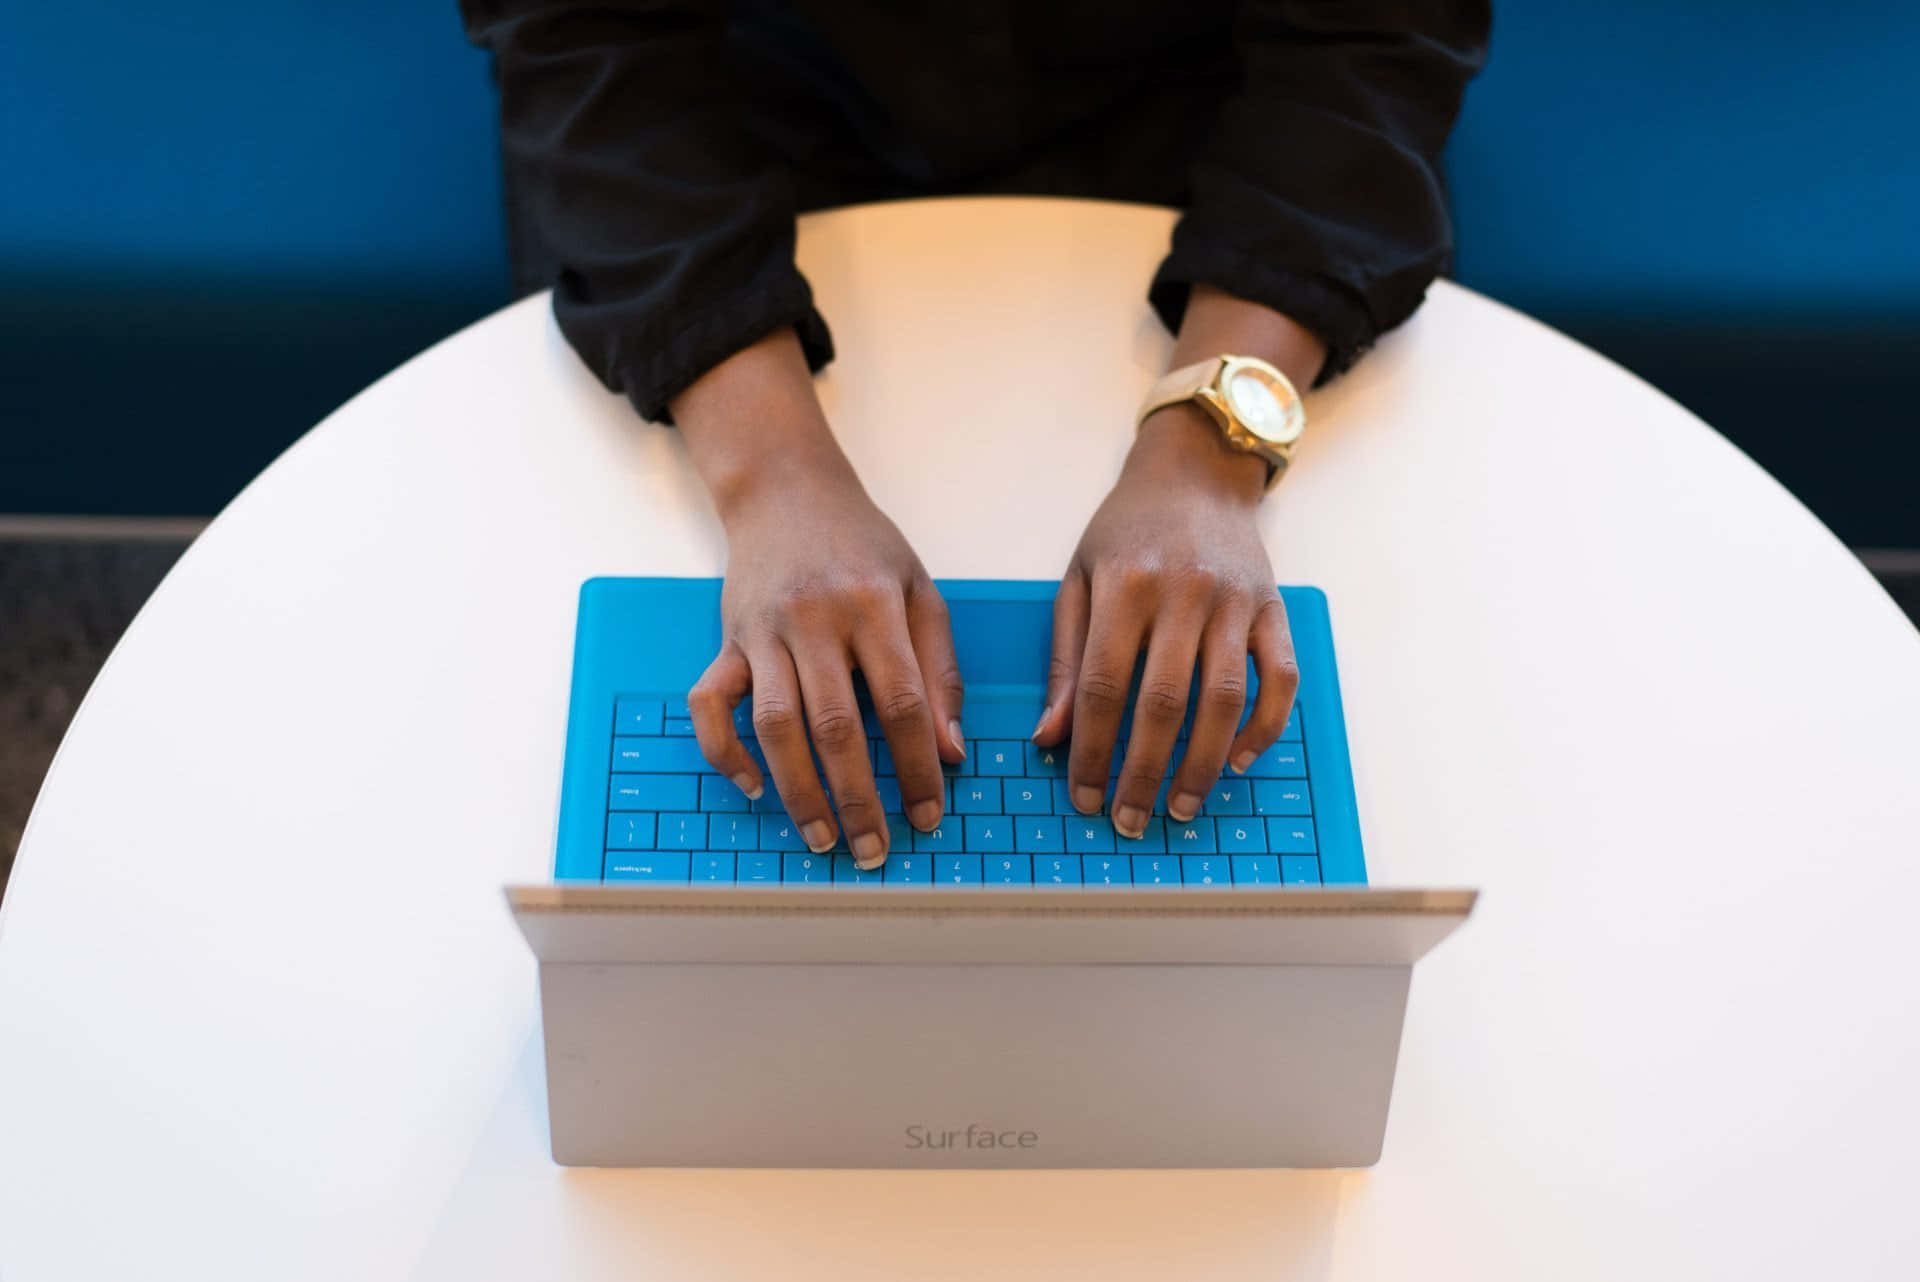 A Woman Is Typing On A Blue Surface Laptop